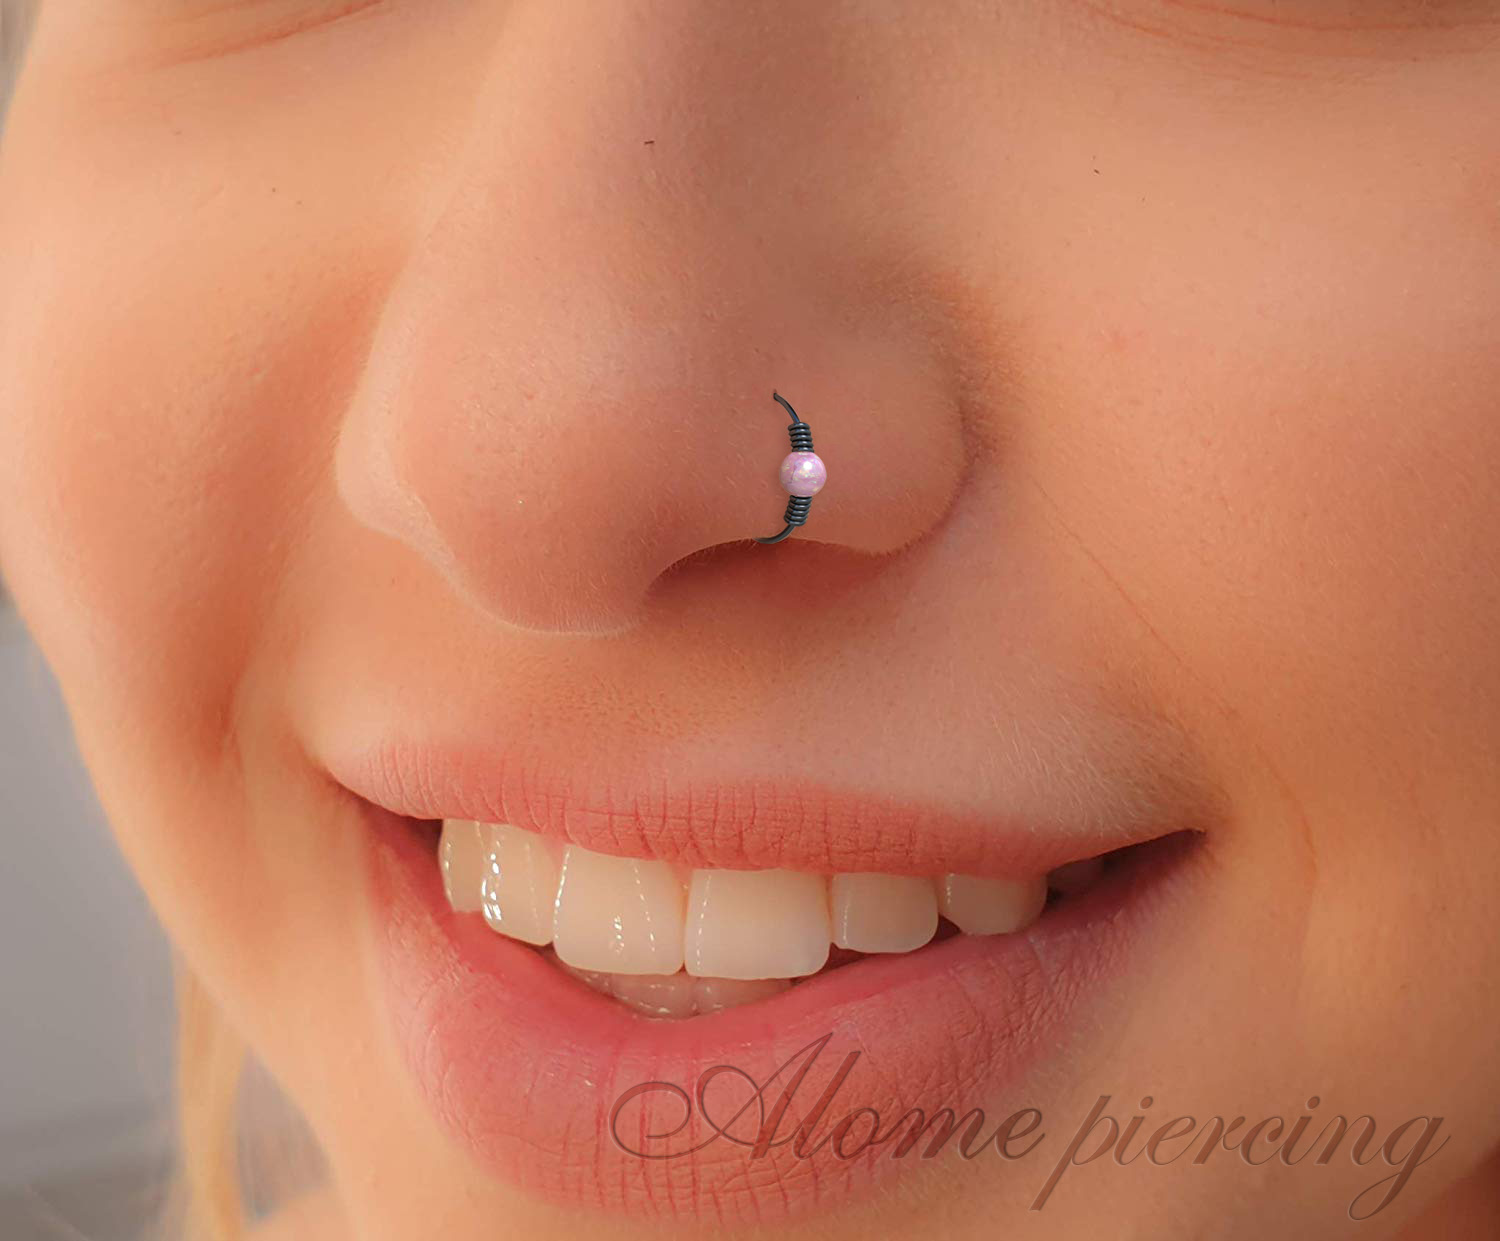 Silver nose ring with Turquoise Beads - Ultra Thin 24G Sterling Silver Nose  ring piercing ring - tiny nose hoop with beads - 7mm nose hoop :  Amazon.co.uk: Handmade Products